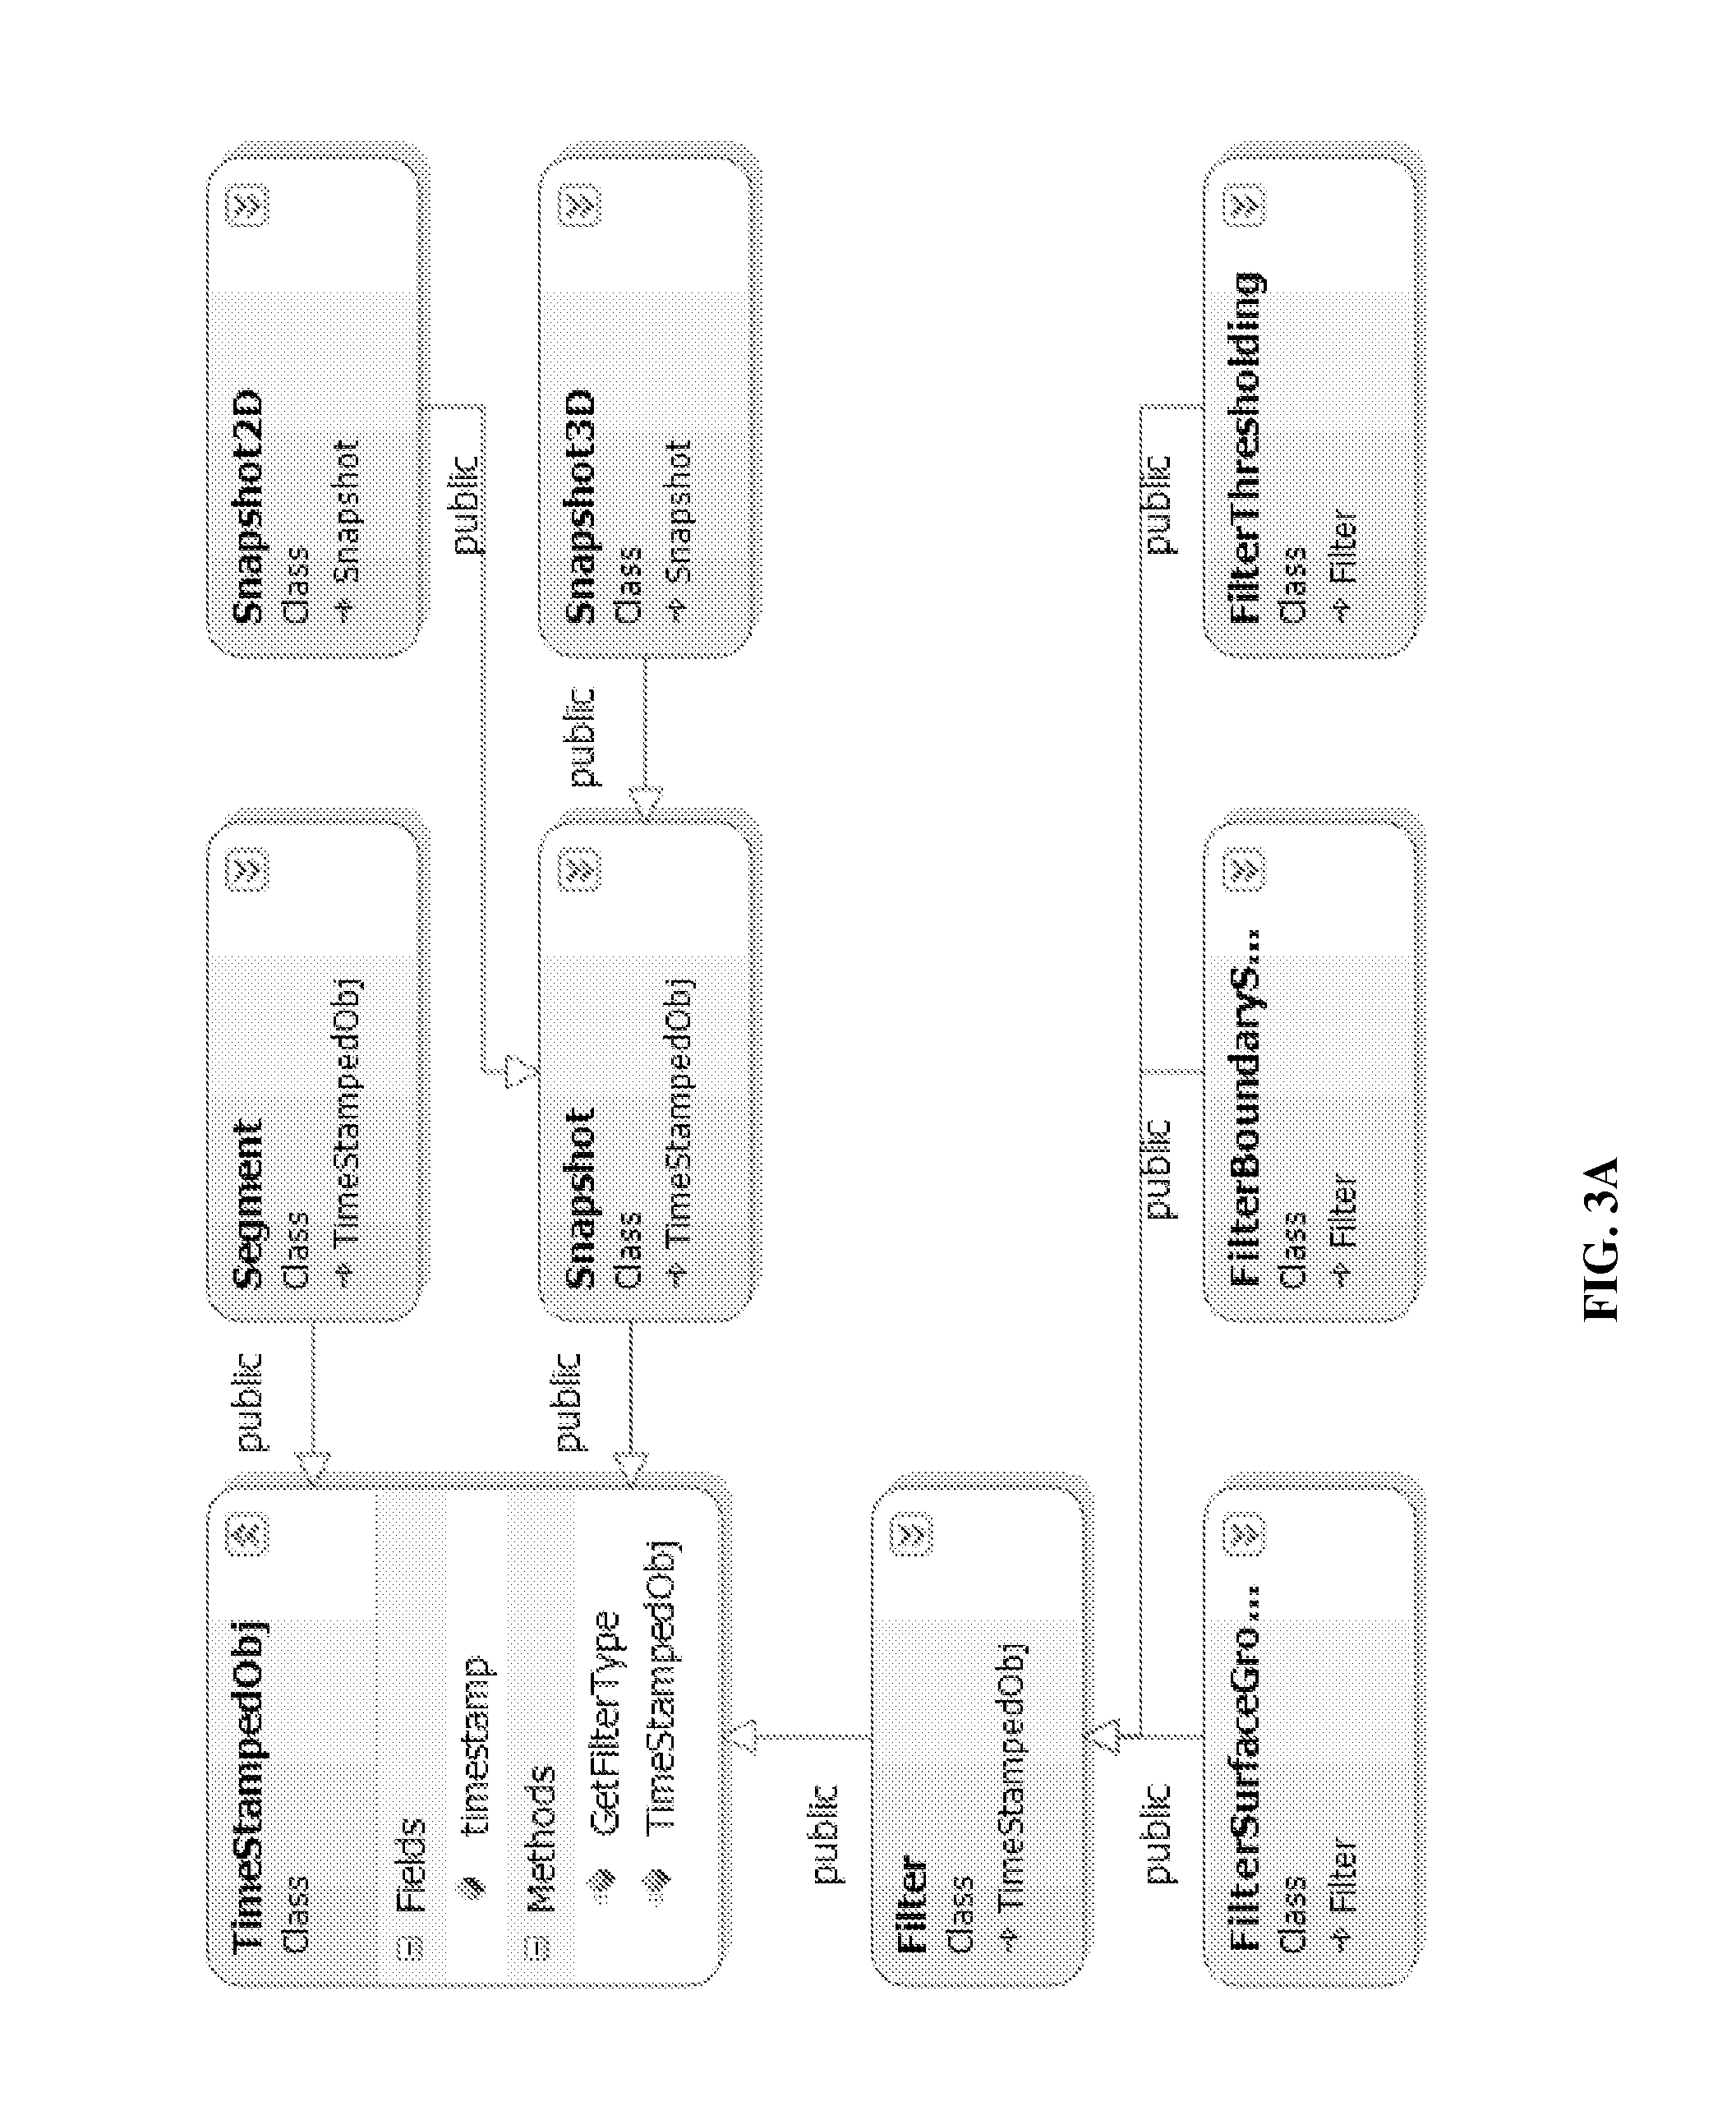 Method and software system for treatment planning and surgical guide CAD/CAM